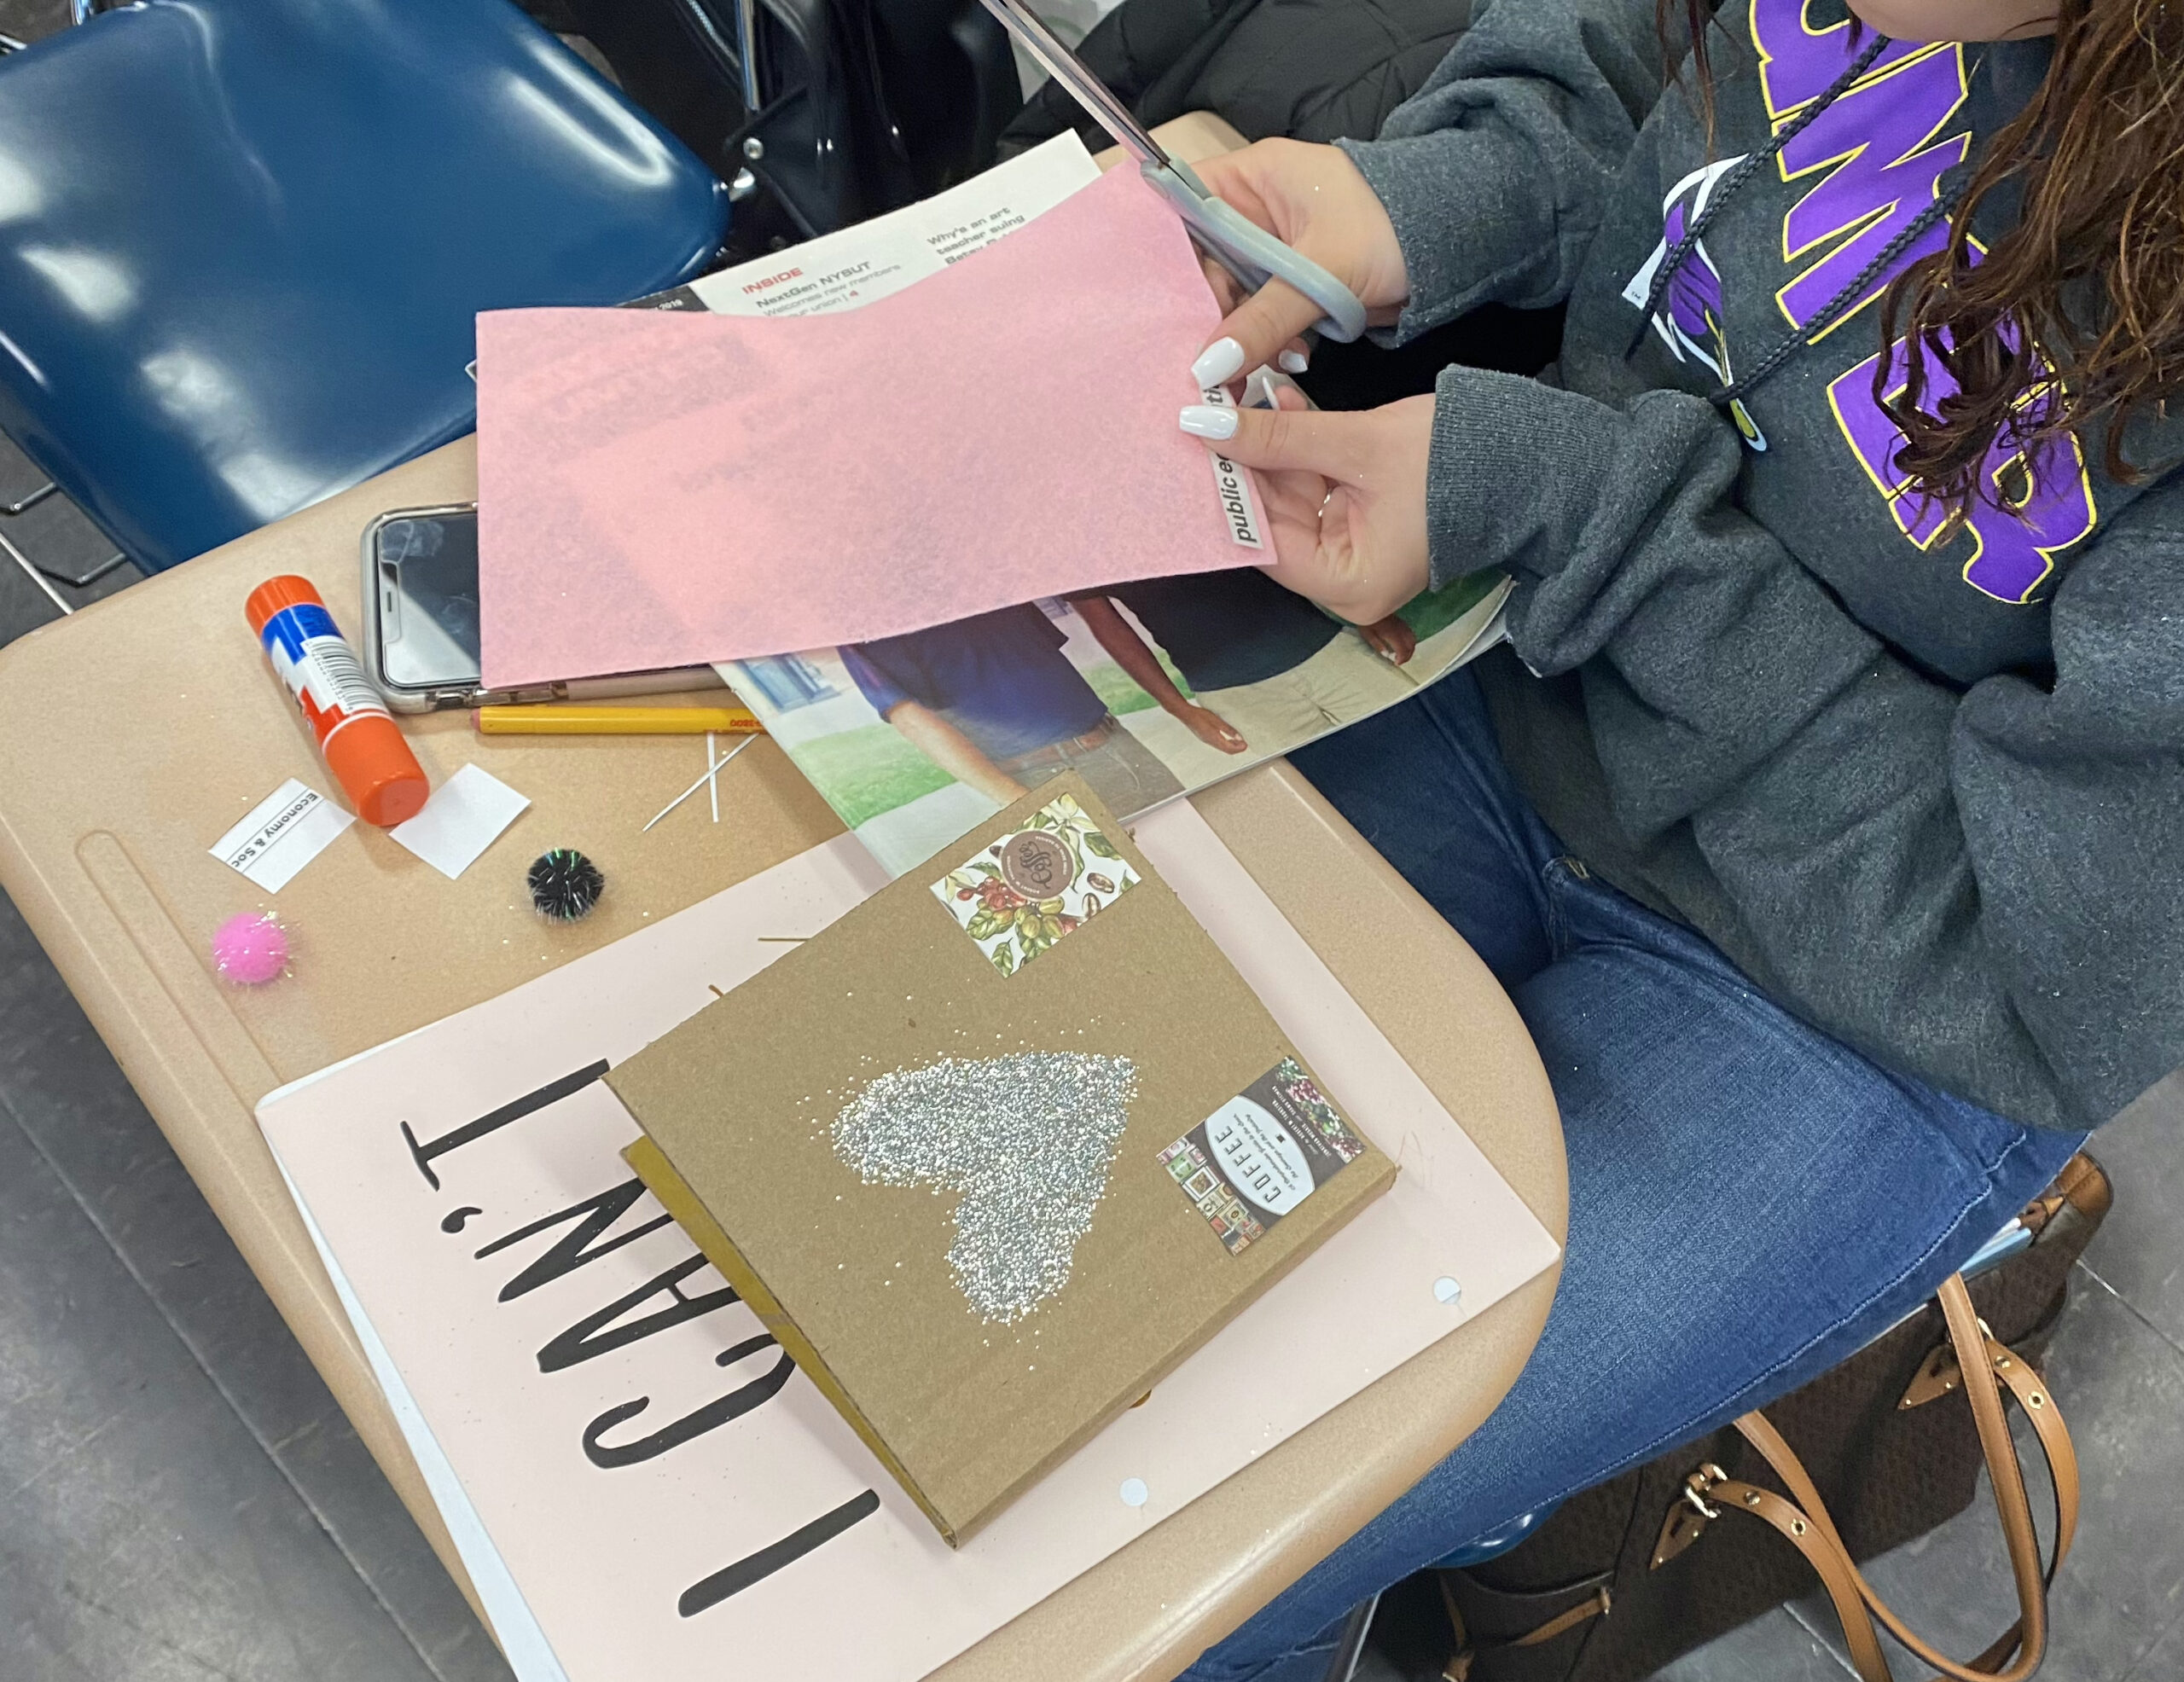 A student cuts pink tissue paper to add to a cartonera book in progress. The cover is plain cardboard with a silver glitter heart